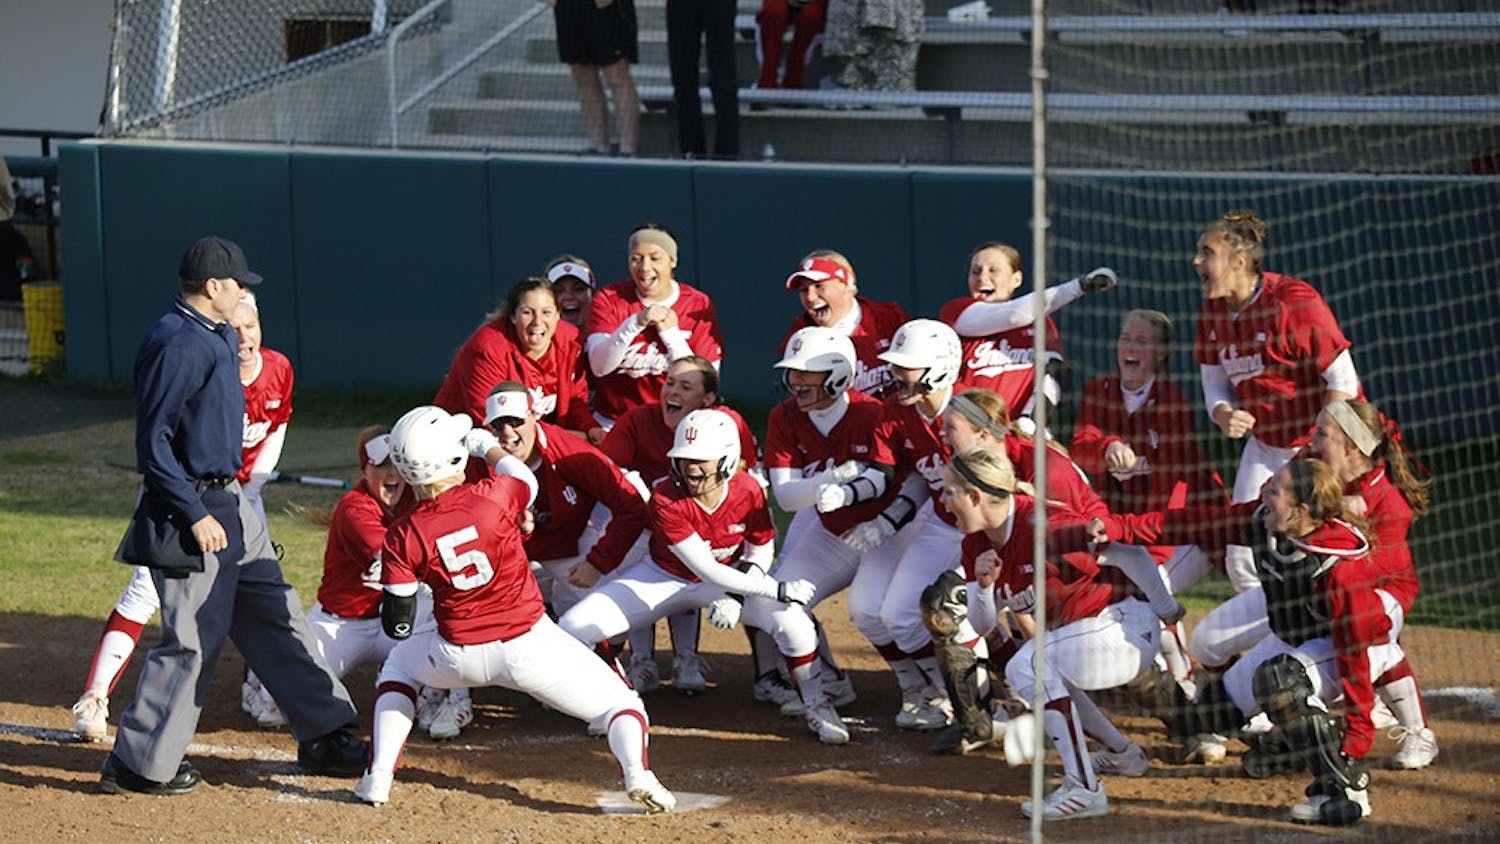 Members of the IU Softball team celebrate after freshman Mena Fulton hit a 3-run home run during the last inning of IU's game against Purdue Wednesday at the Andy Mohr Field; resulting in a 6-3 win for the hoosiers. 